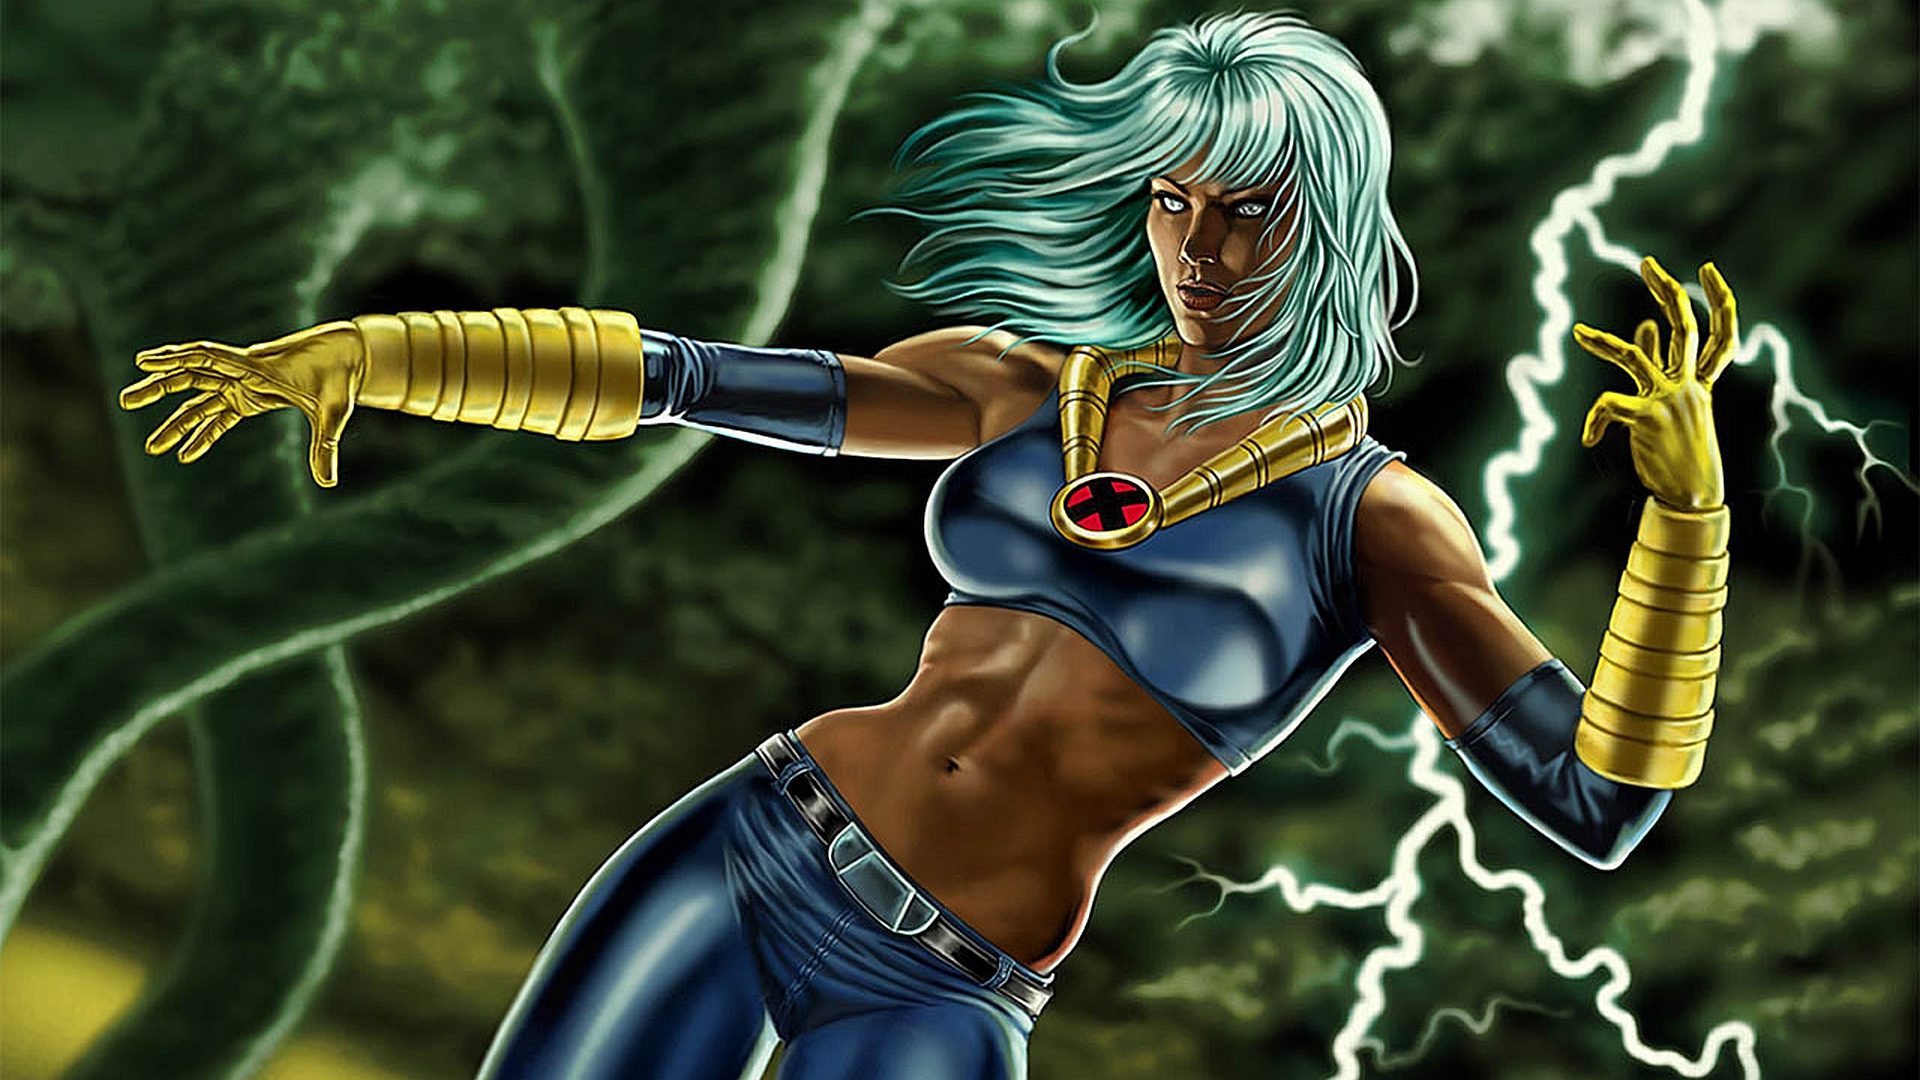 1920x1080 150+ Storm (Marvel Comics) HD Wallpapers and Backgrounds